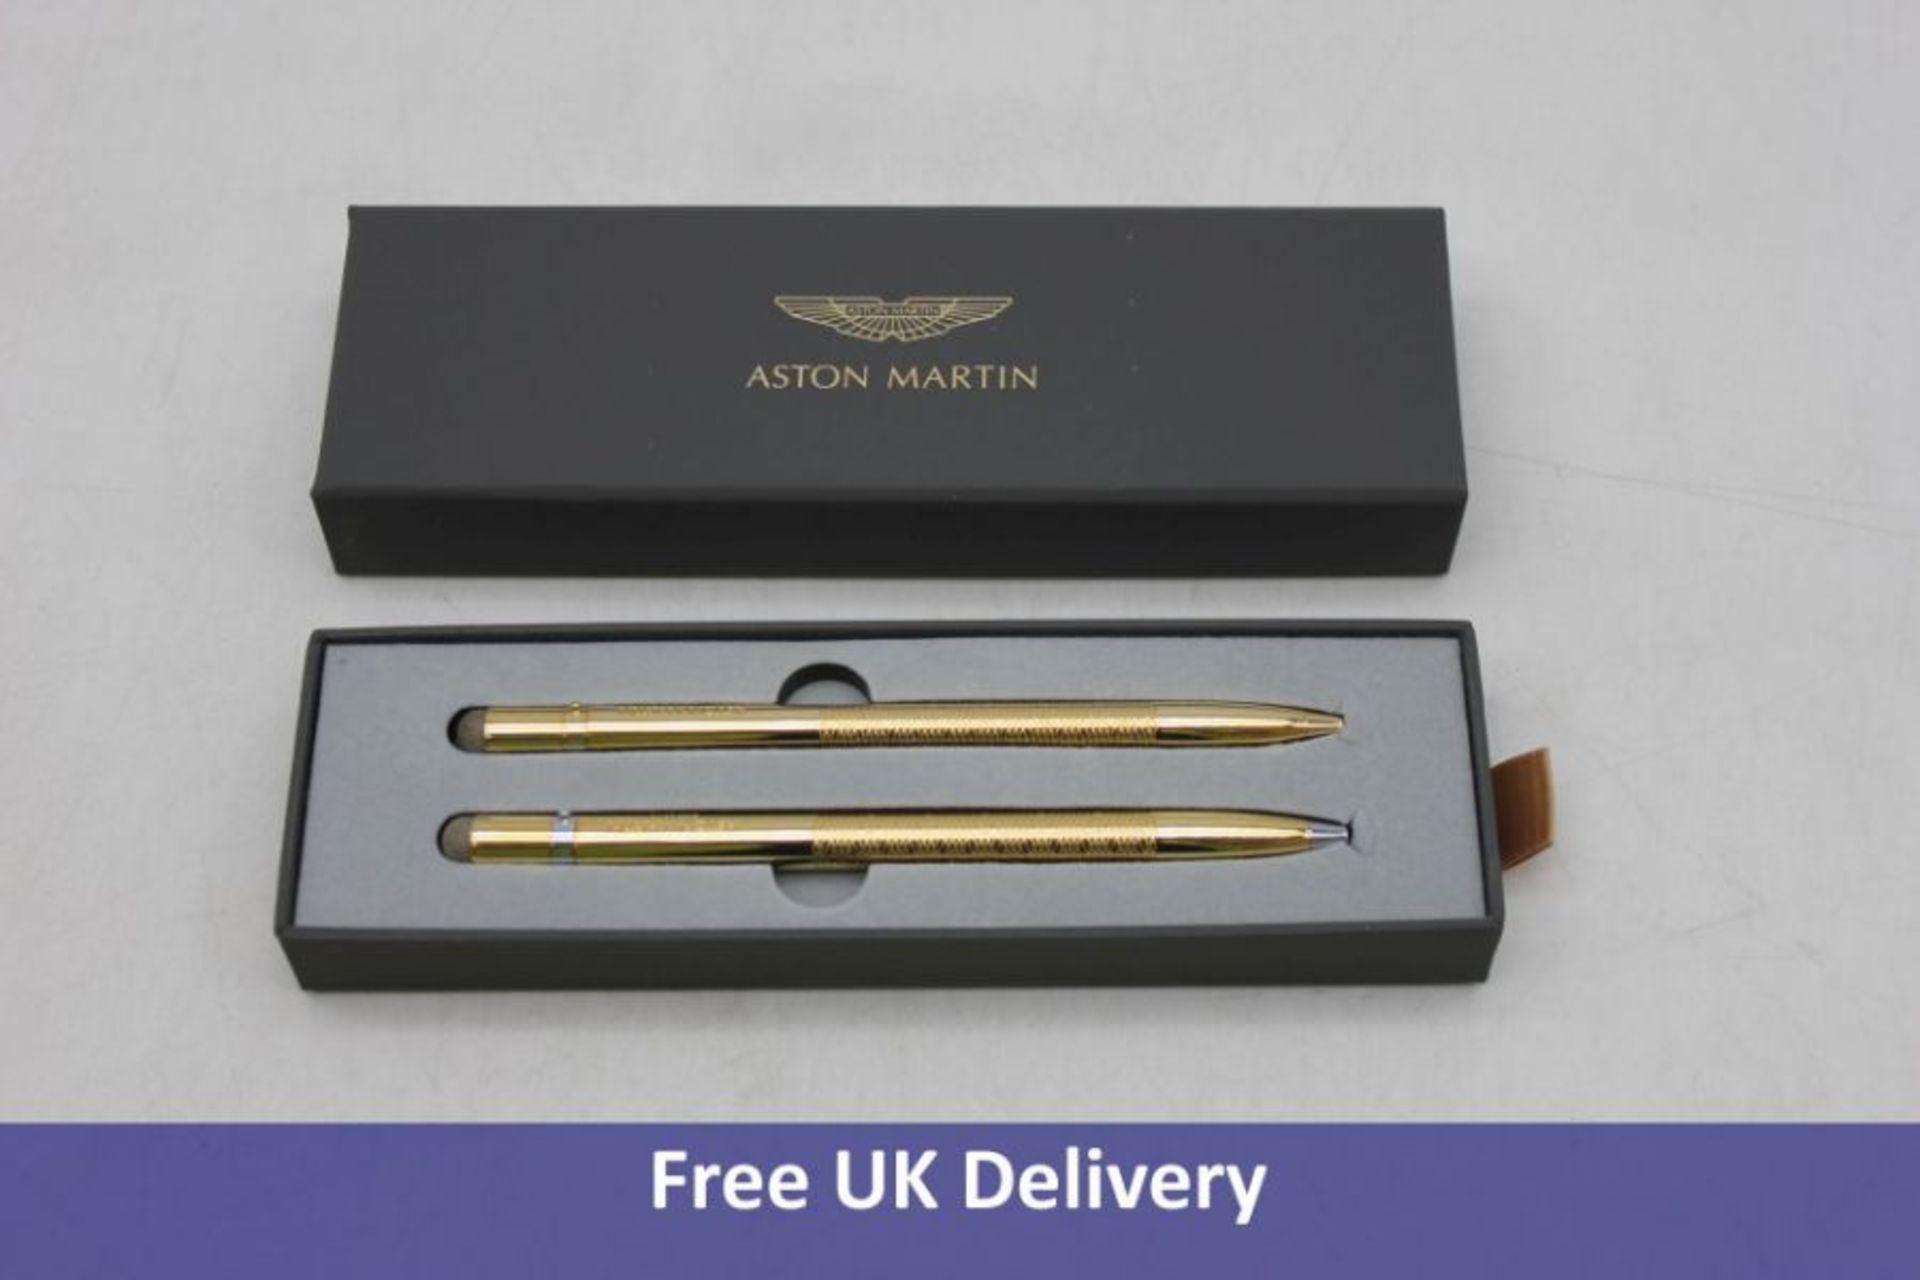 Five Aston Martin Stylus Ball Pen and Roller, Gold - Image 3 of 5